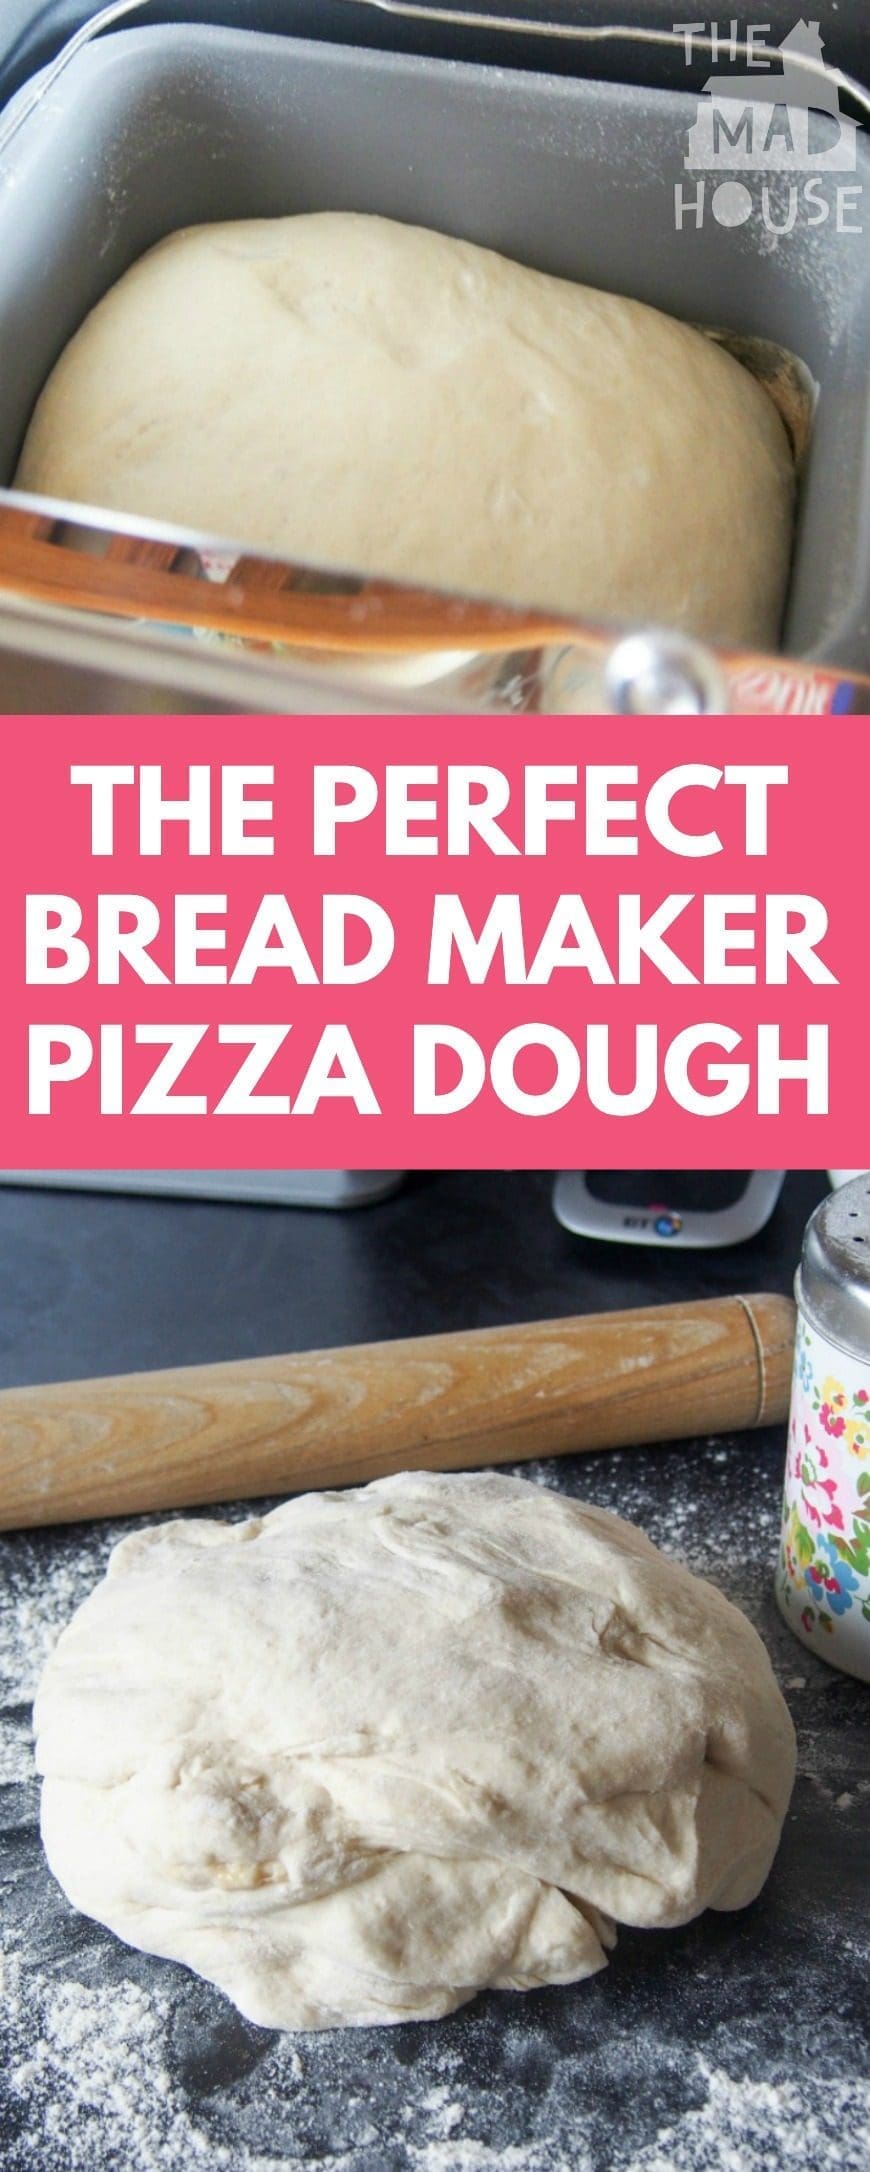 A delicious and fail-safe recipe for perfect breadmaker pizza dough every time. How to make the perfect bread maker pizza dough